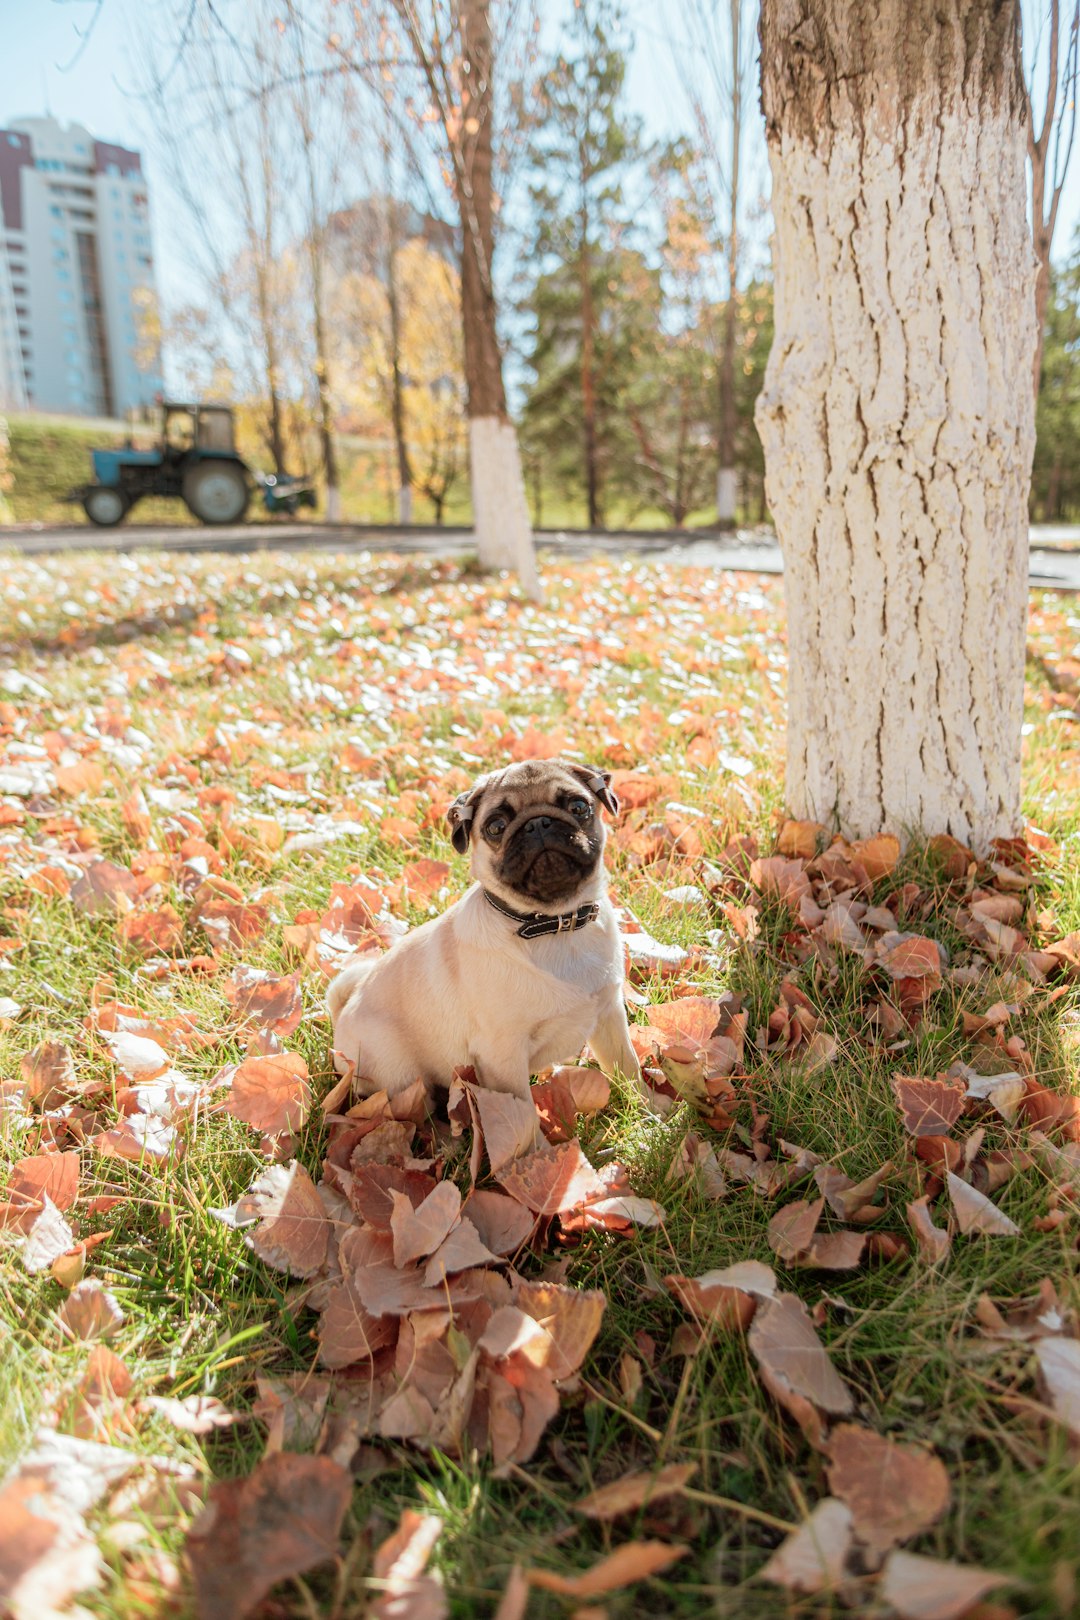 fawn pug sitting on ground with dried leaves